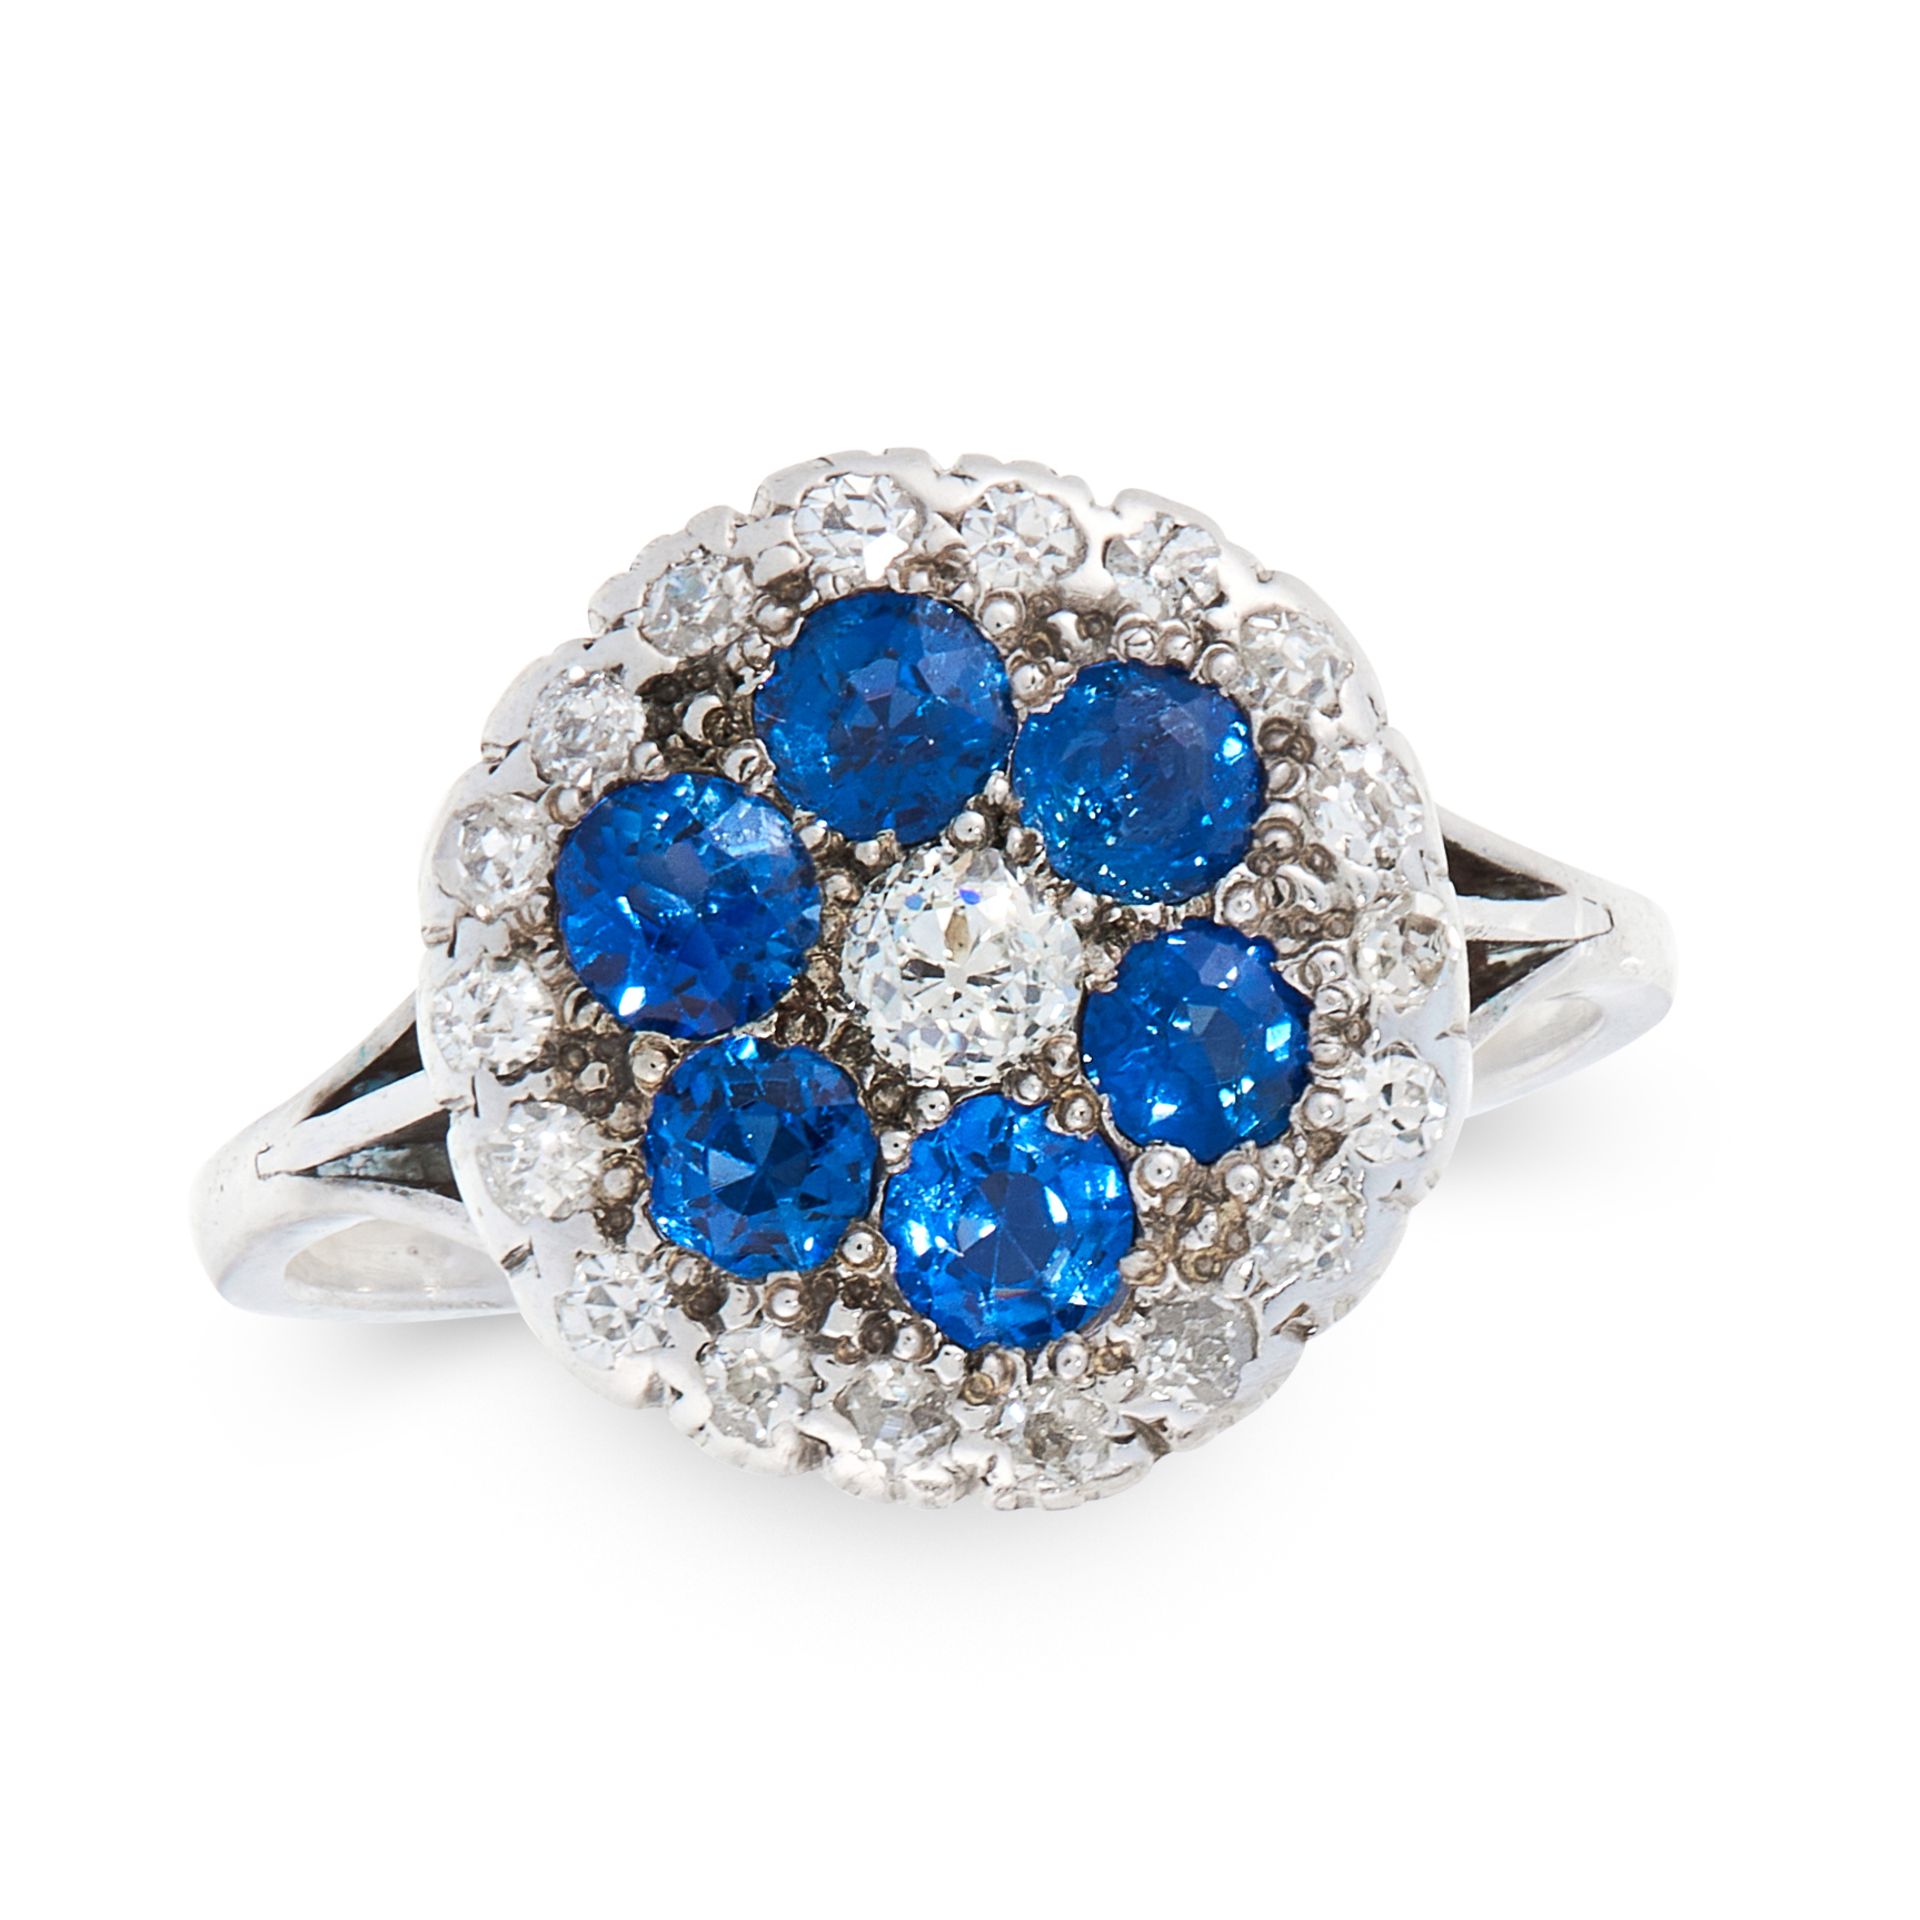 A SAPPHIRE AND DIAMOND DRESS RING, EARLY 20TH CENTURY set with an old cut diamond, within concentric